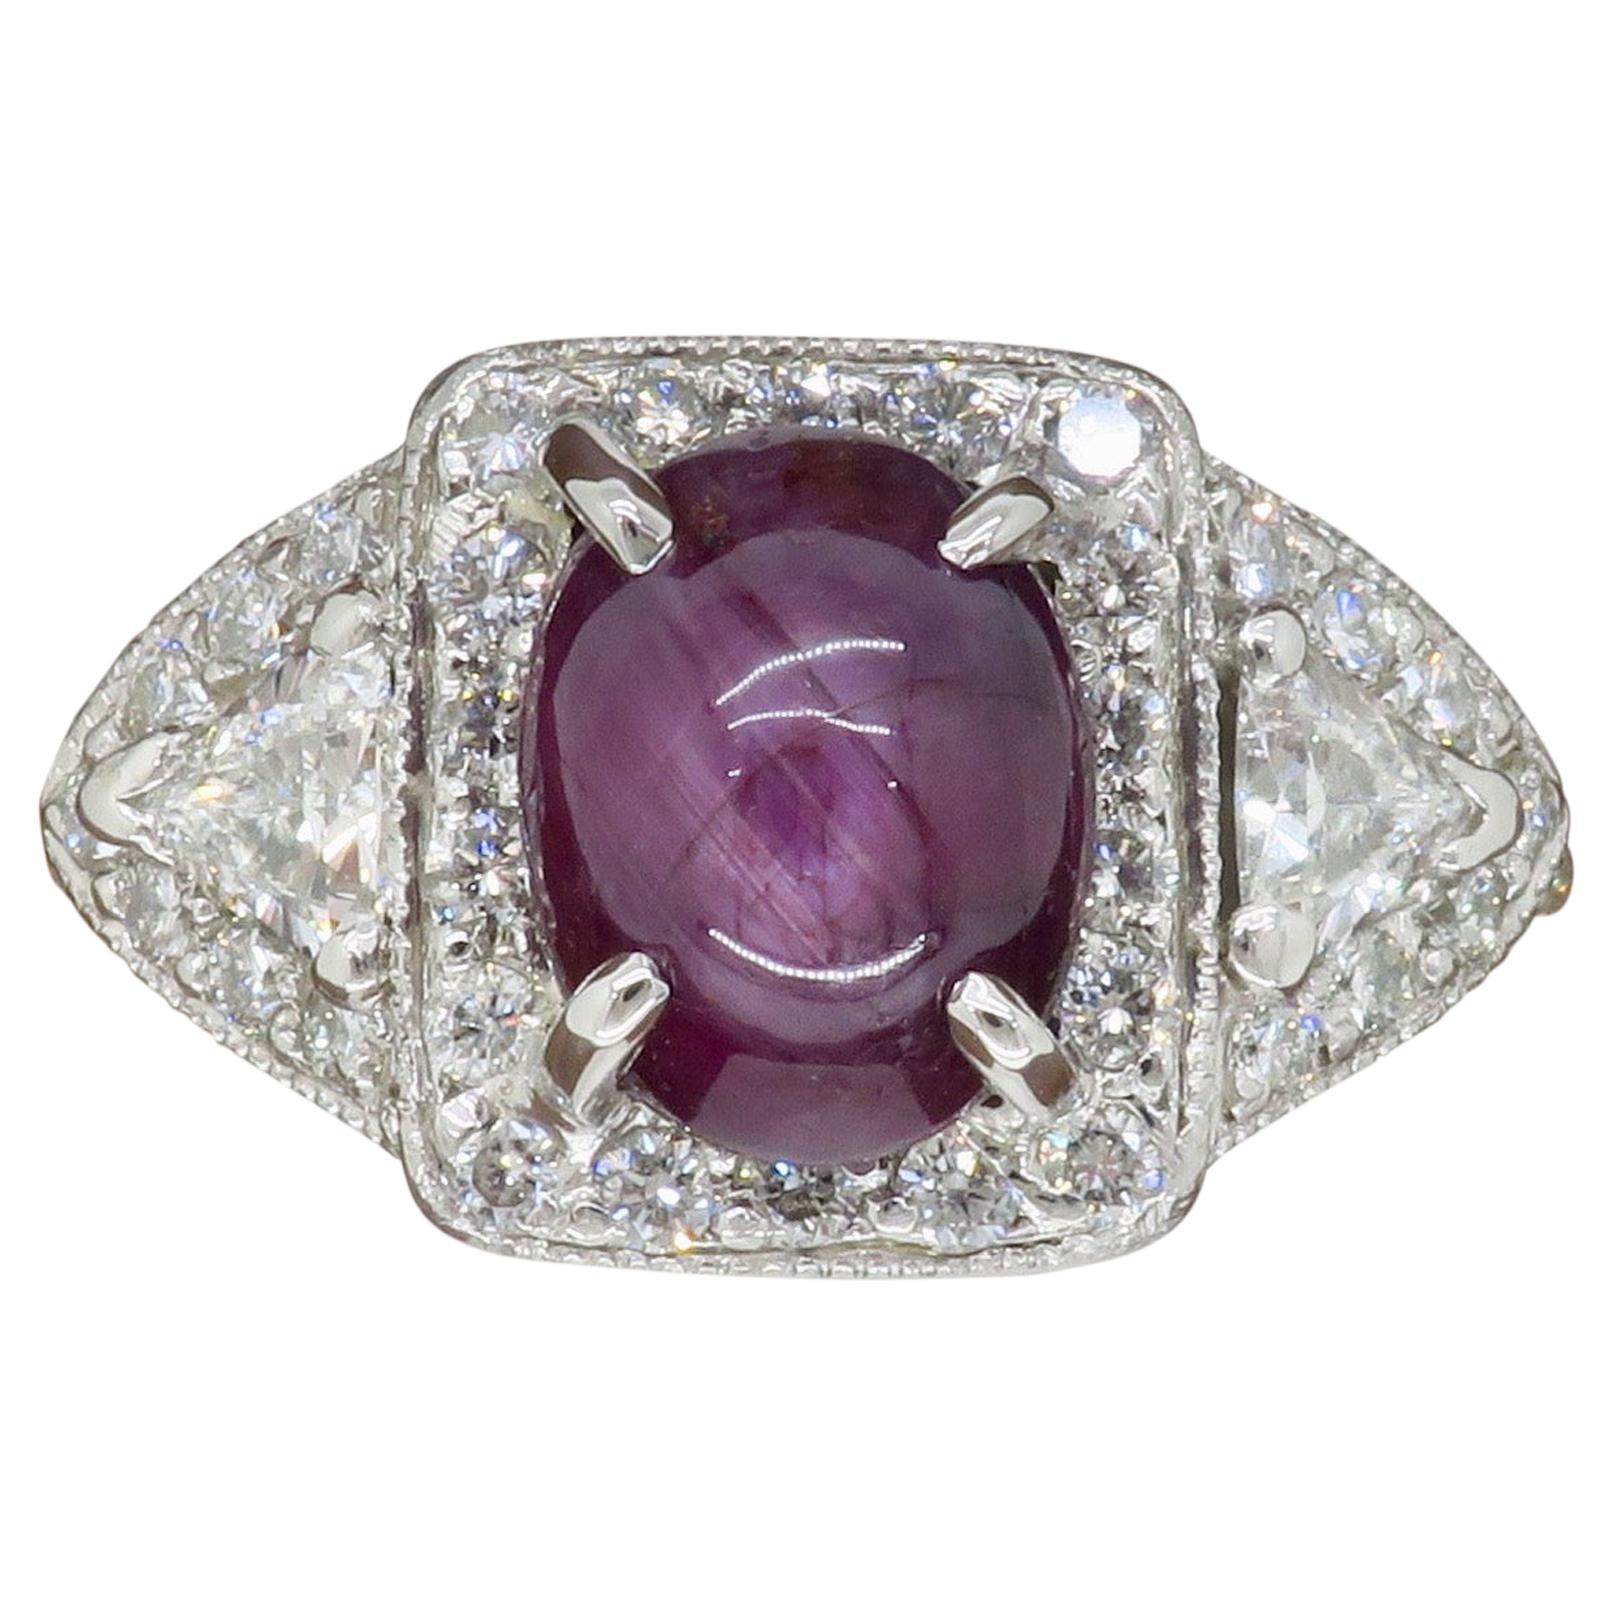 GIA Certified Star Sapphire and Diamond Ring Made in Platinum